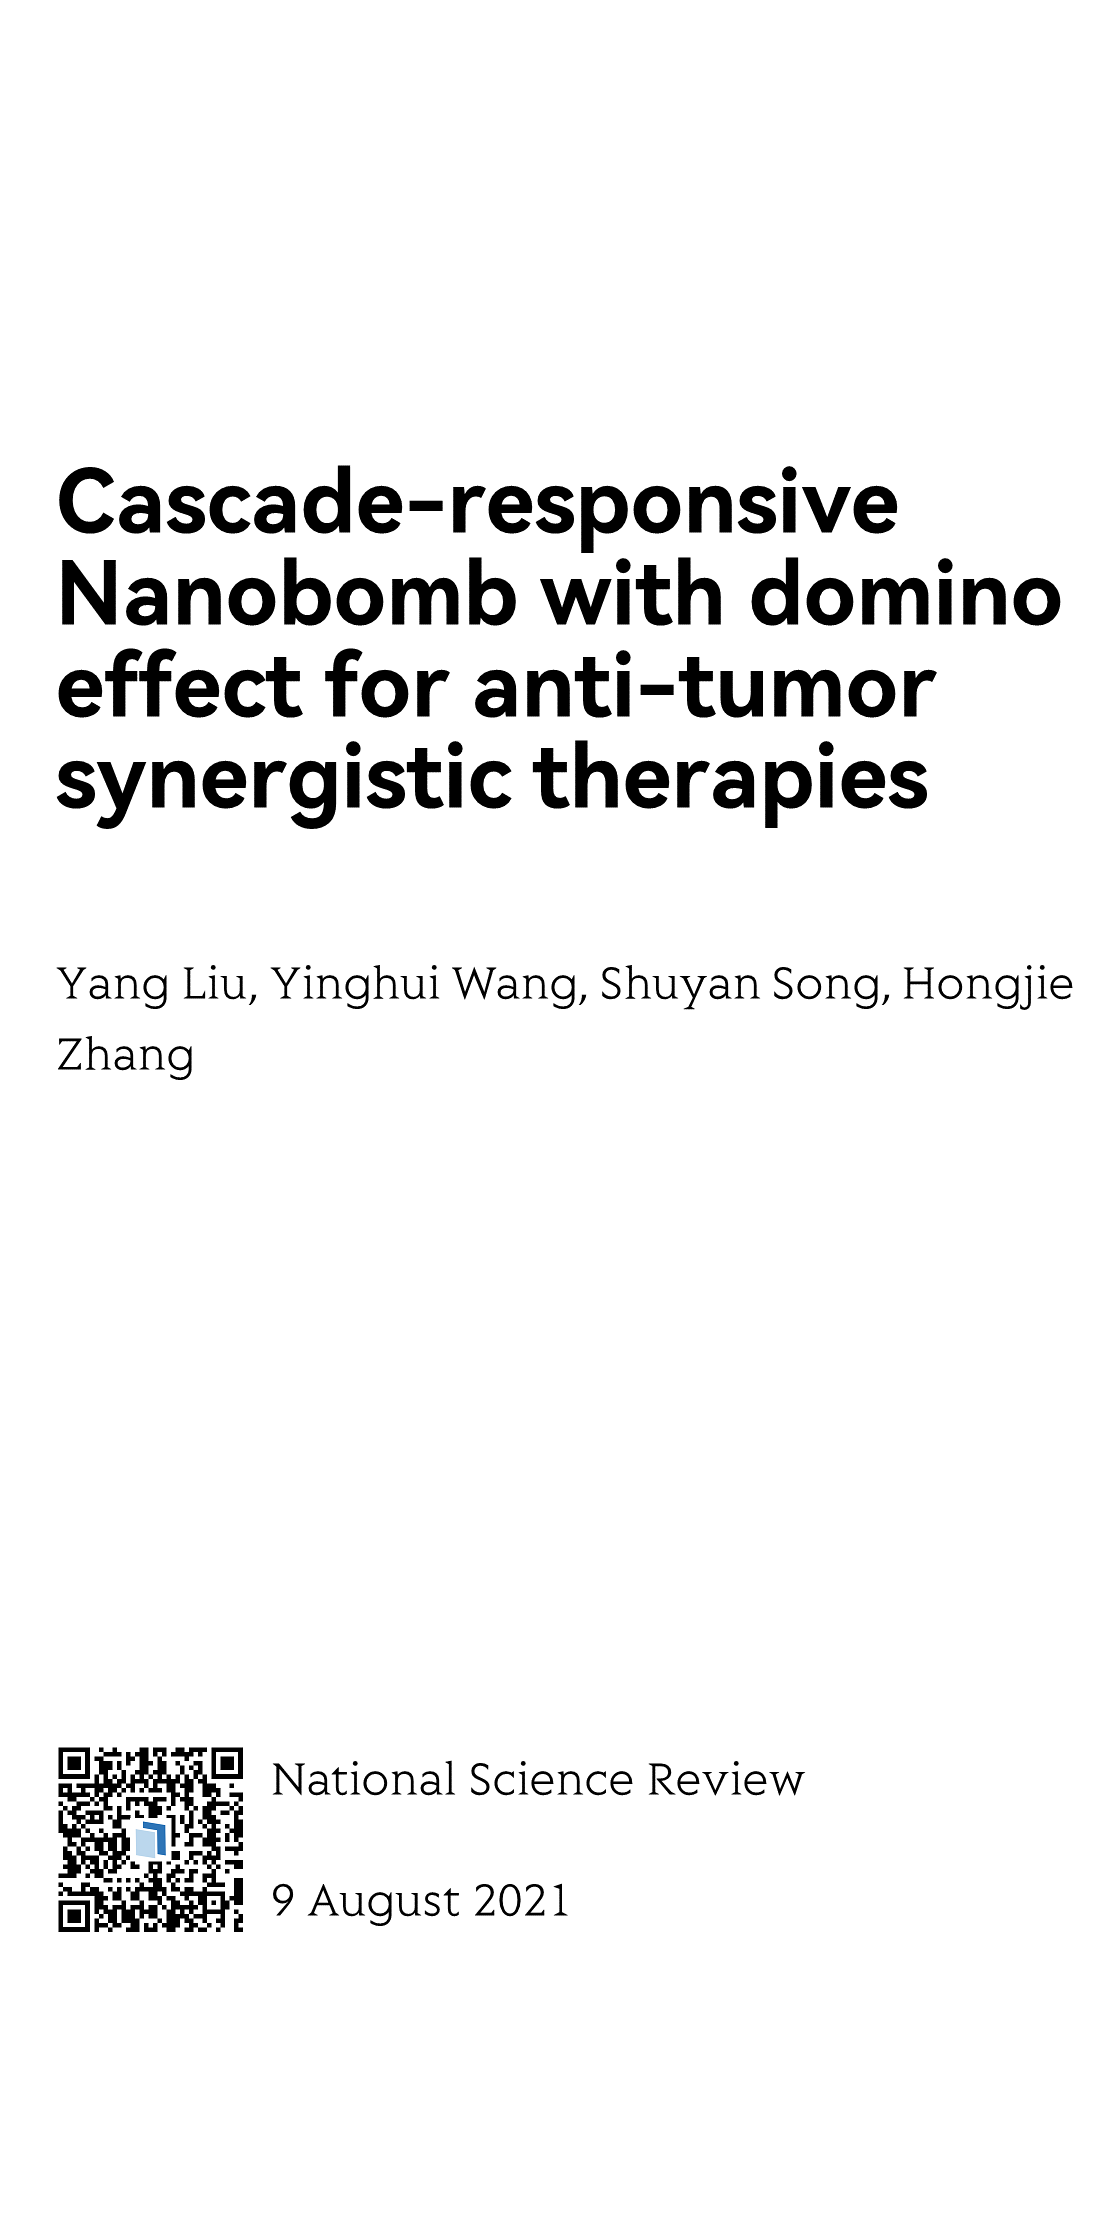 Cascade-responsive Nanobomb with domino effect for anti-tumor synergistic therapies_1